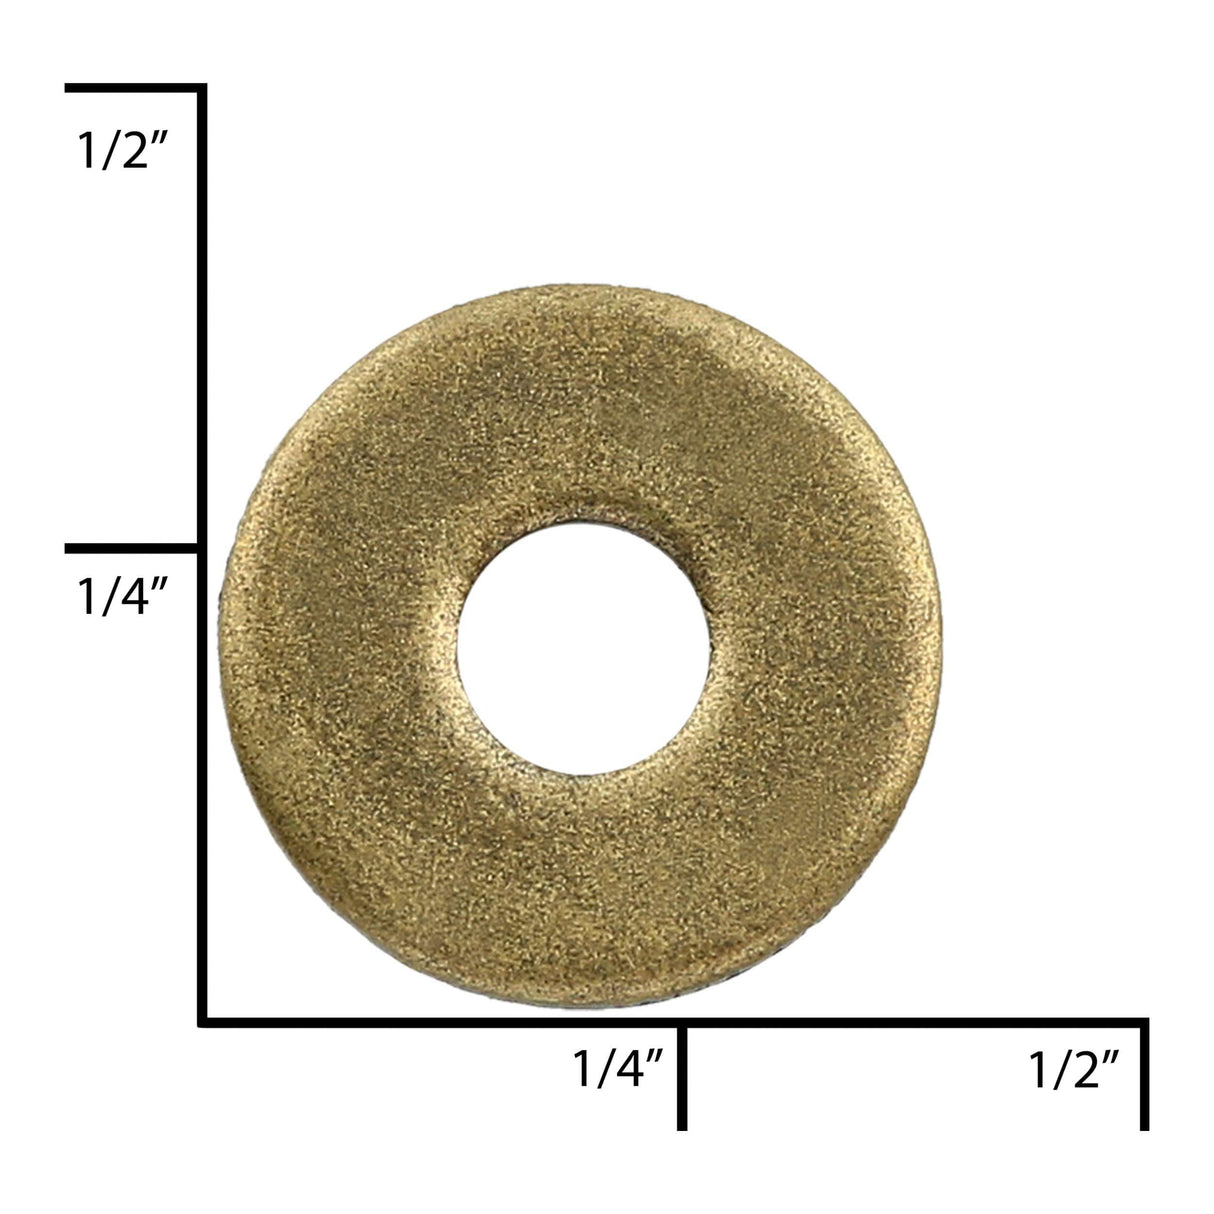 Ohio Travel Bag Fasteners 3/8" Antique Brass, Washer, Steel, #L-1126-ANTB L-1126-ANTB